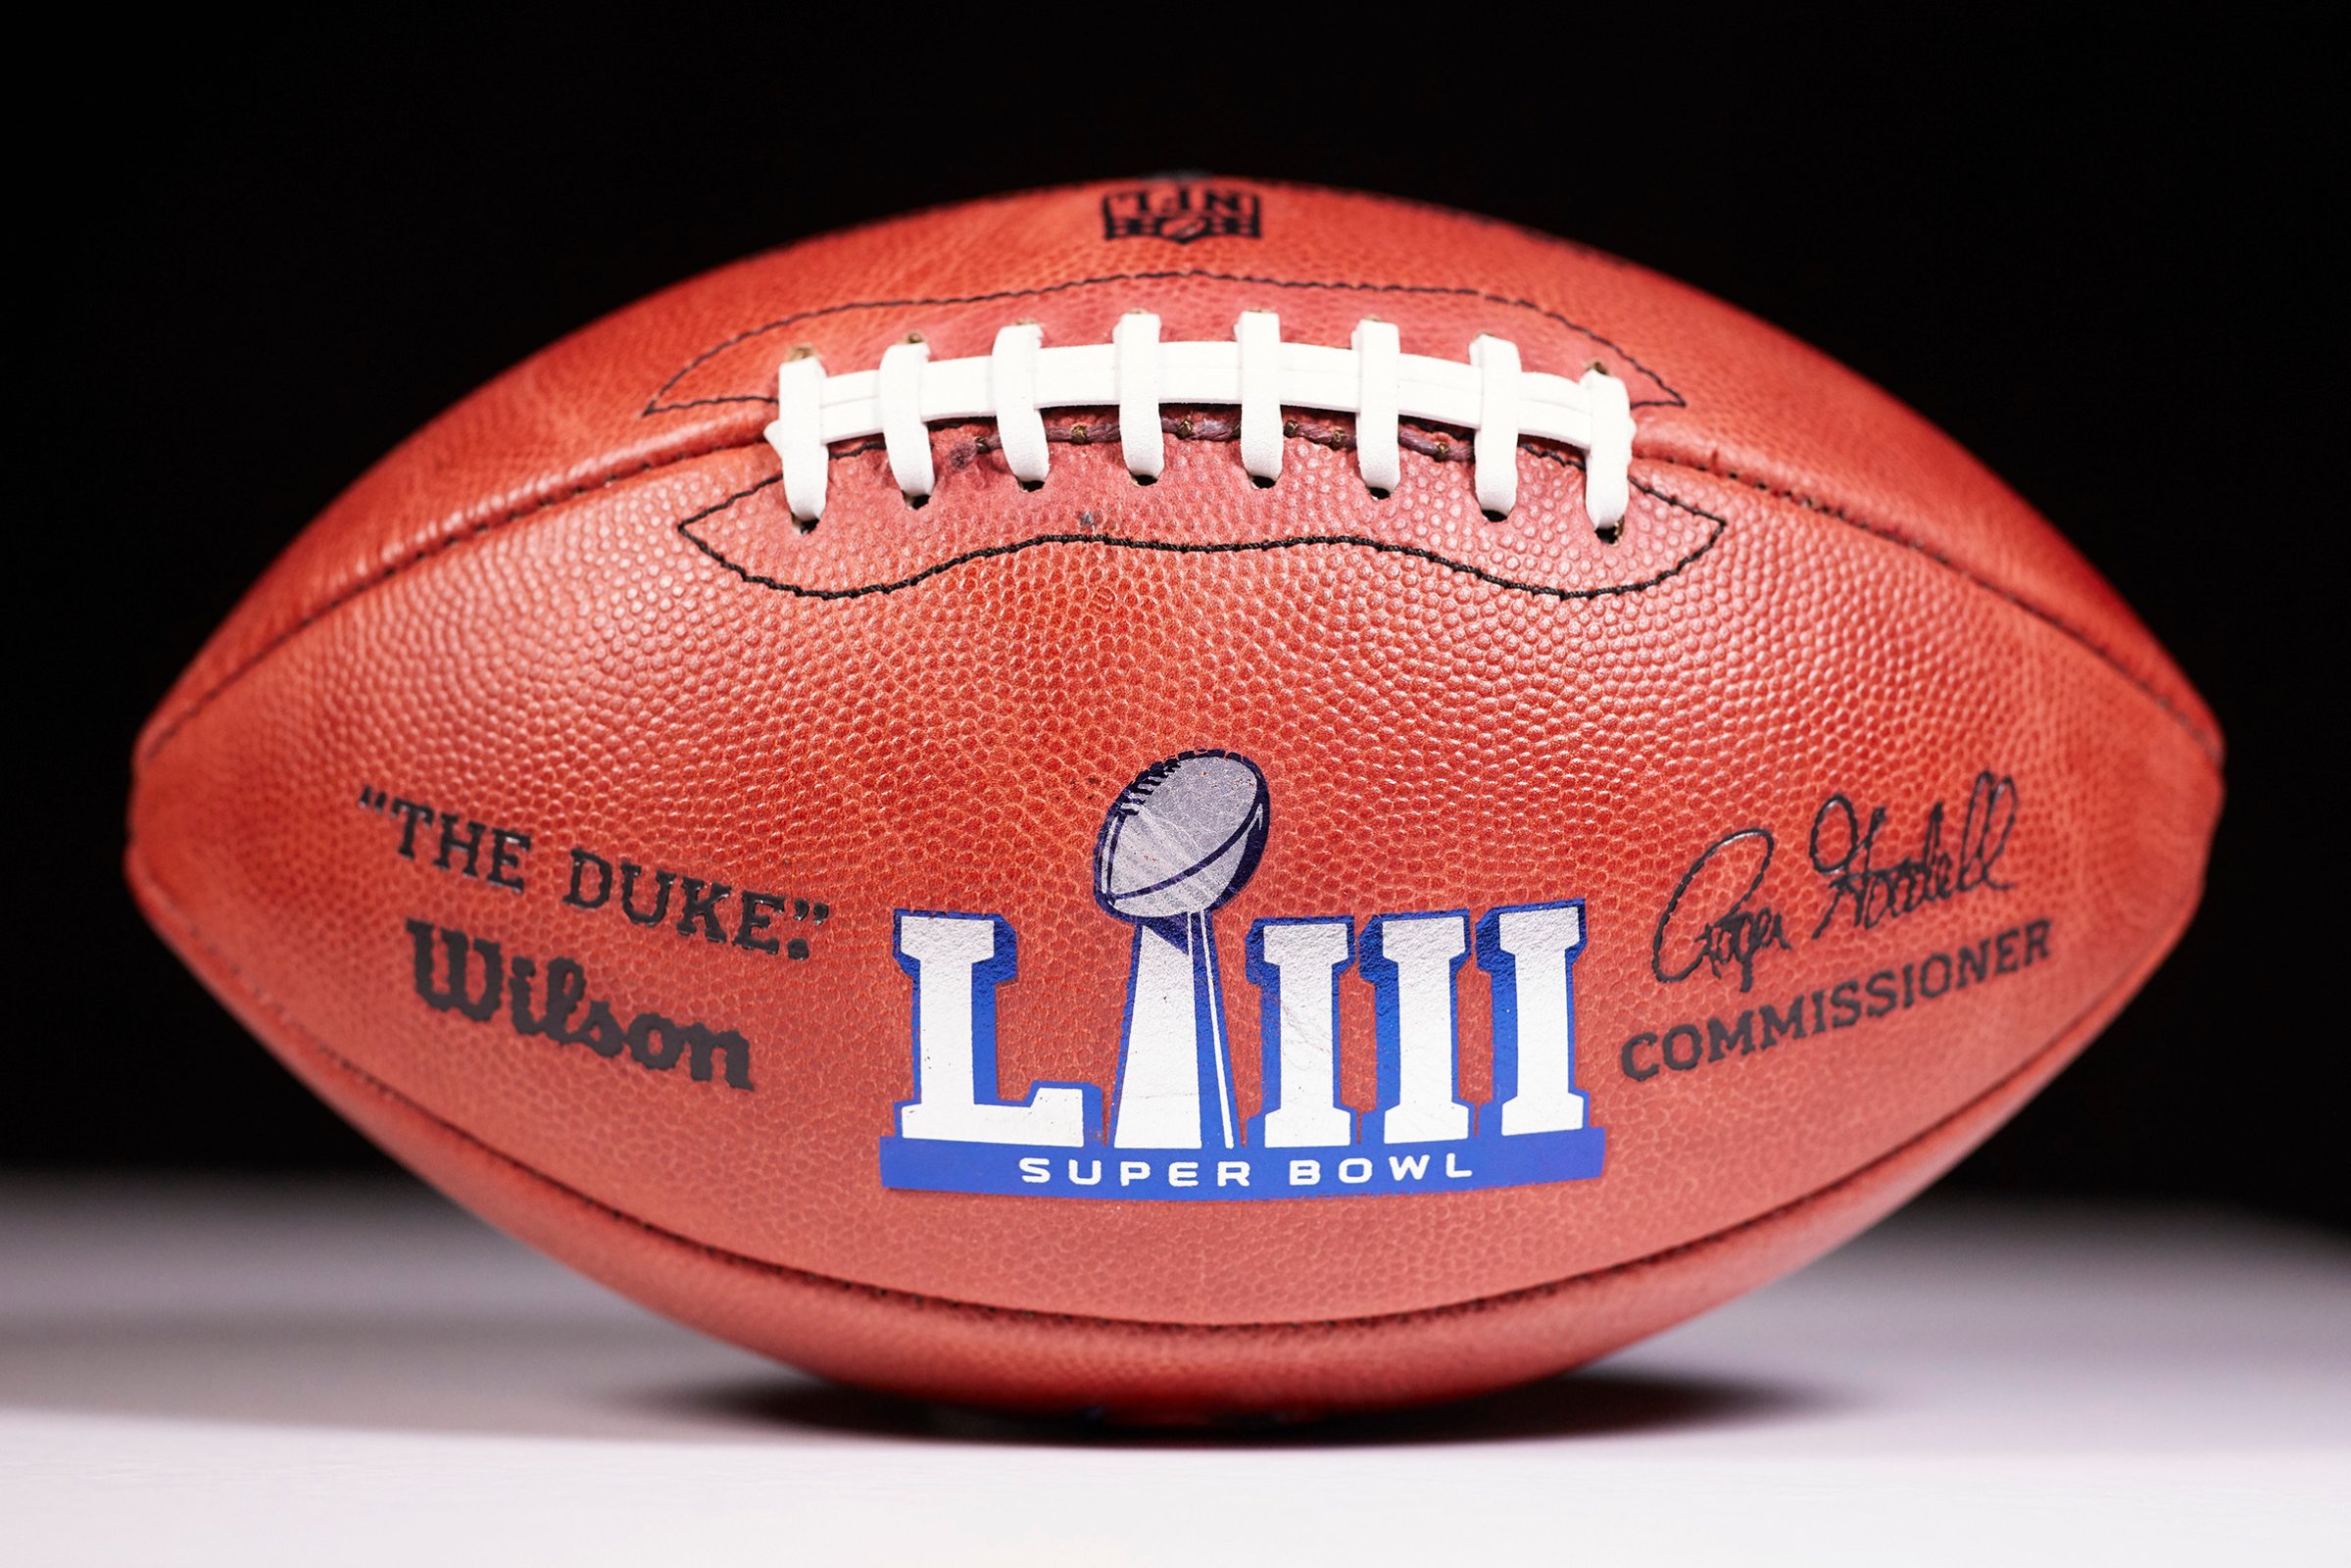 An official ball for the NFL Super Bowl LIII